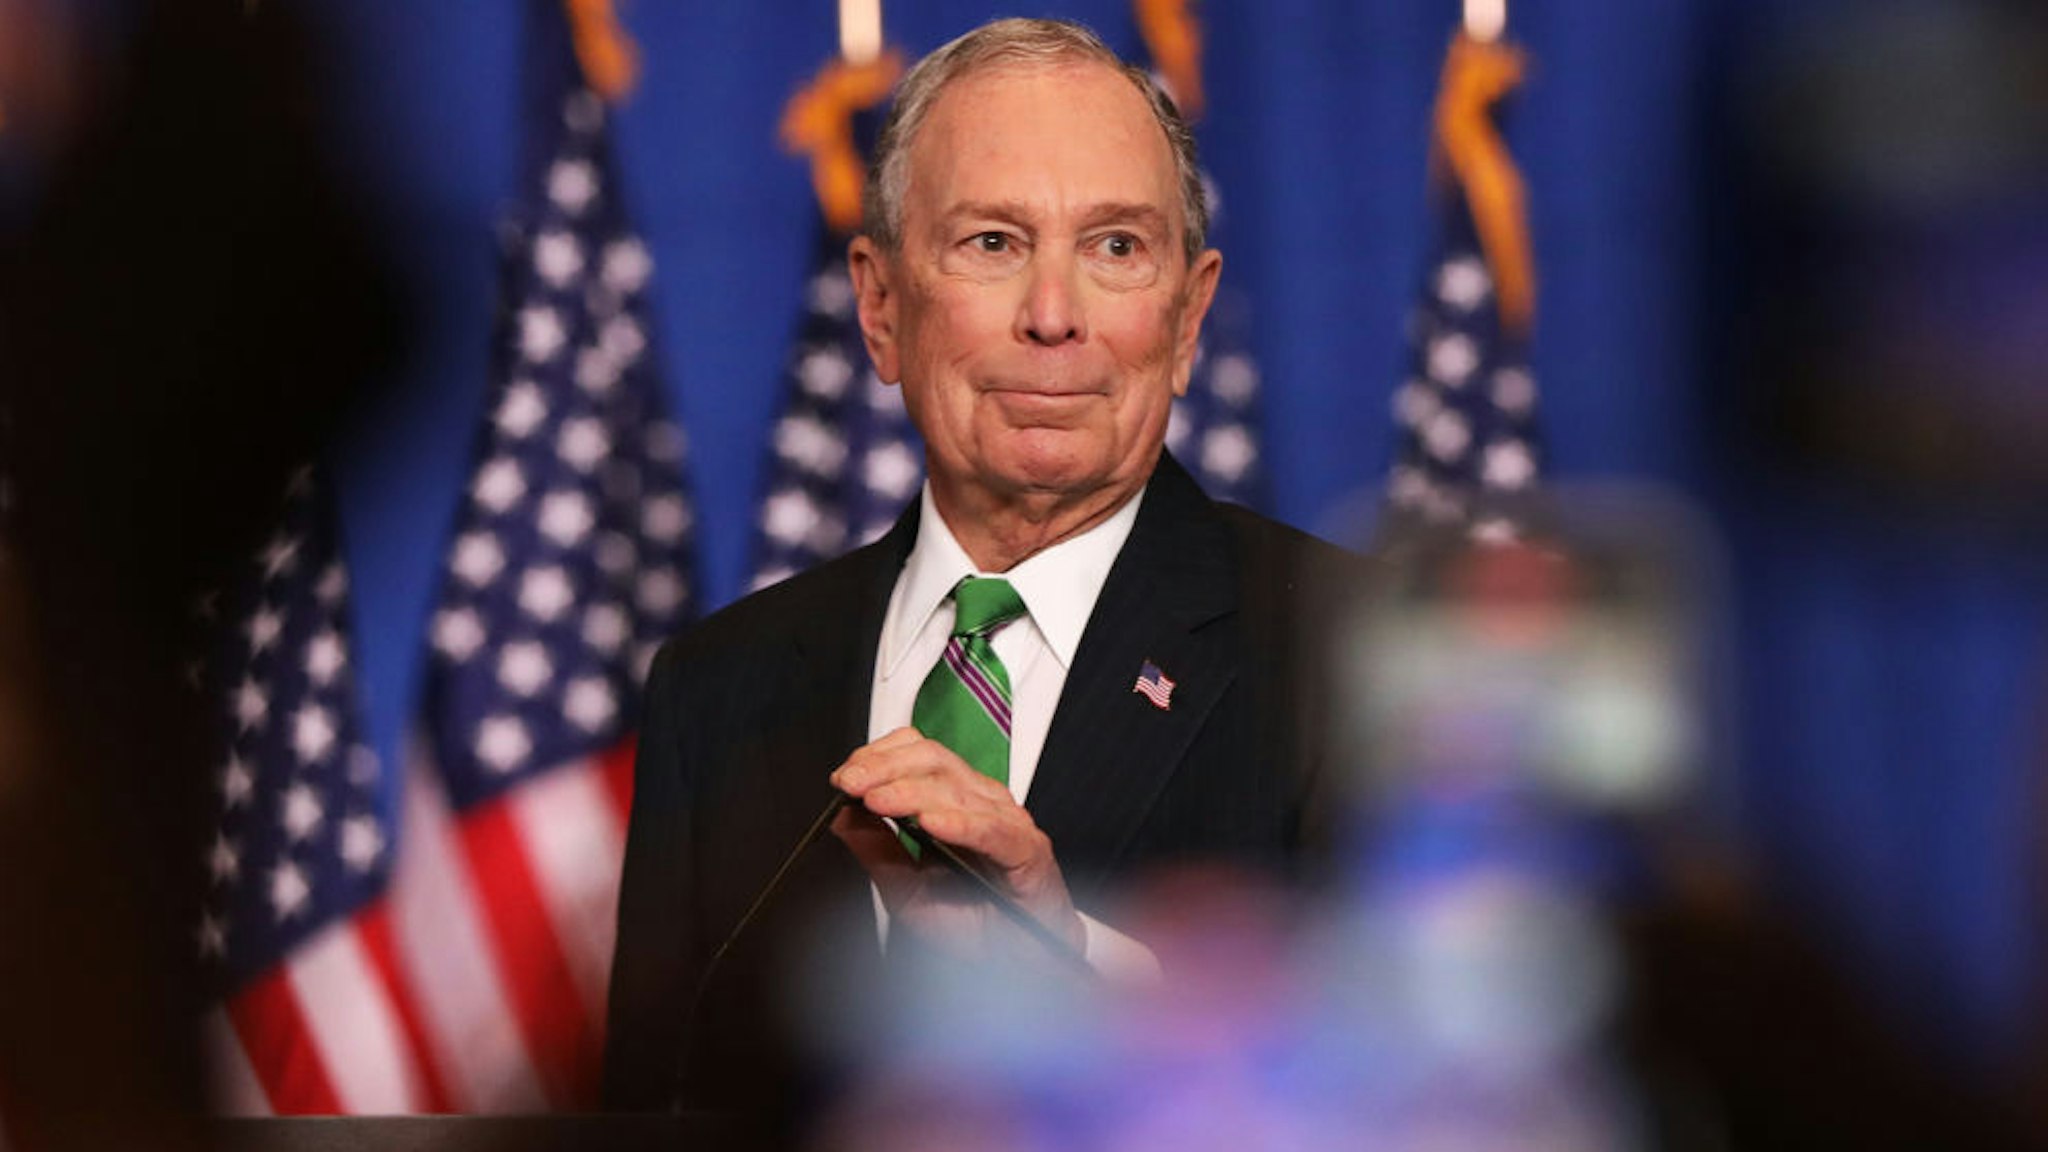 Former Democratic presidential candidate Mike Bloomberg addresses his staff and the media after announcing that he will be ending his campaign on March 04, 2020 in New York City. Bloomberg, who has endorsed Joe Biden, spent millions of dollars in his short lived campaign for president. (Photo by Spencer Platt/Getty Images)